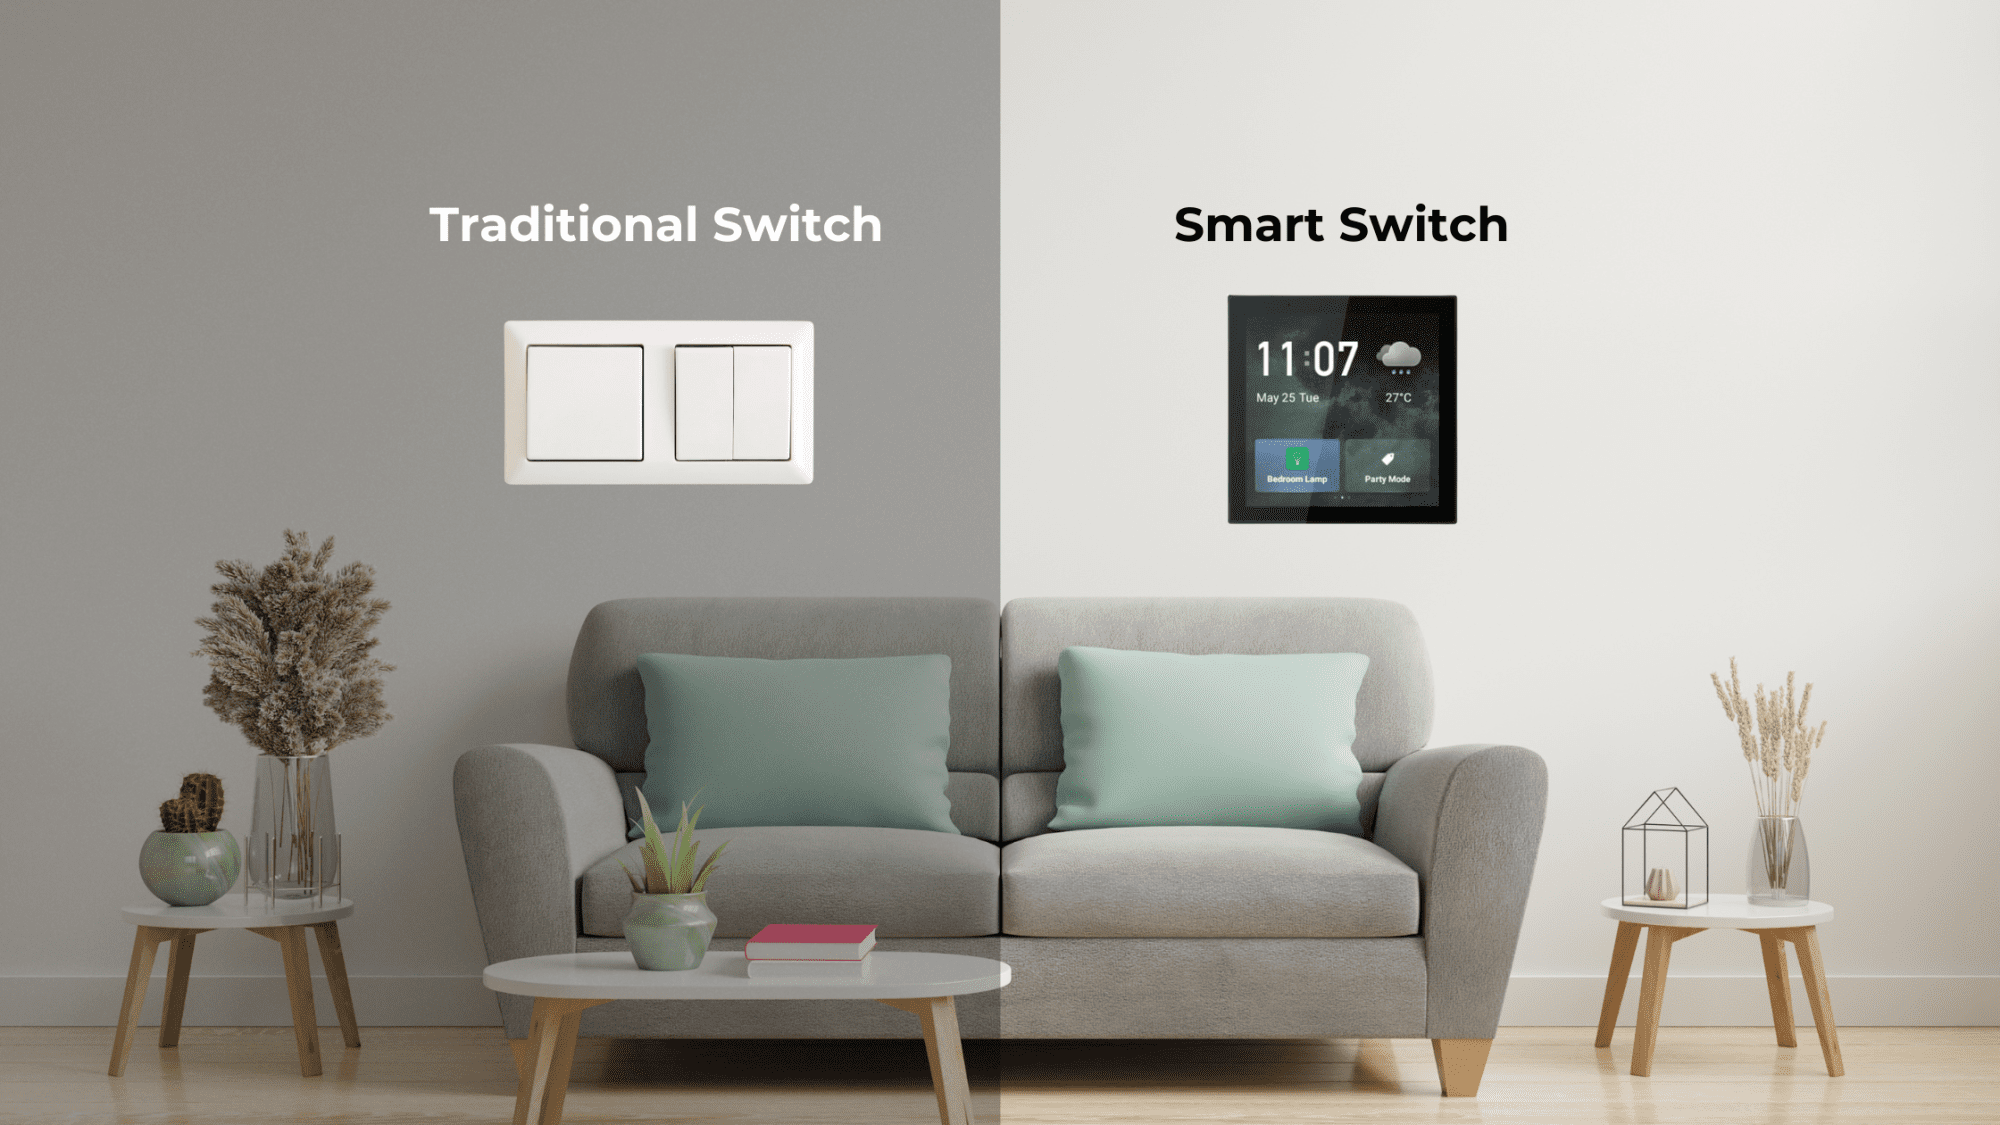 Smart Switch Vs Traditional Switch